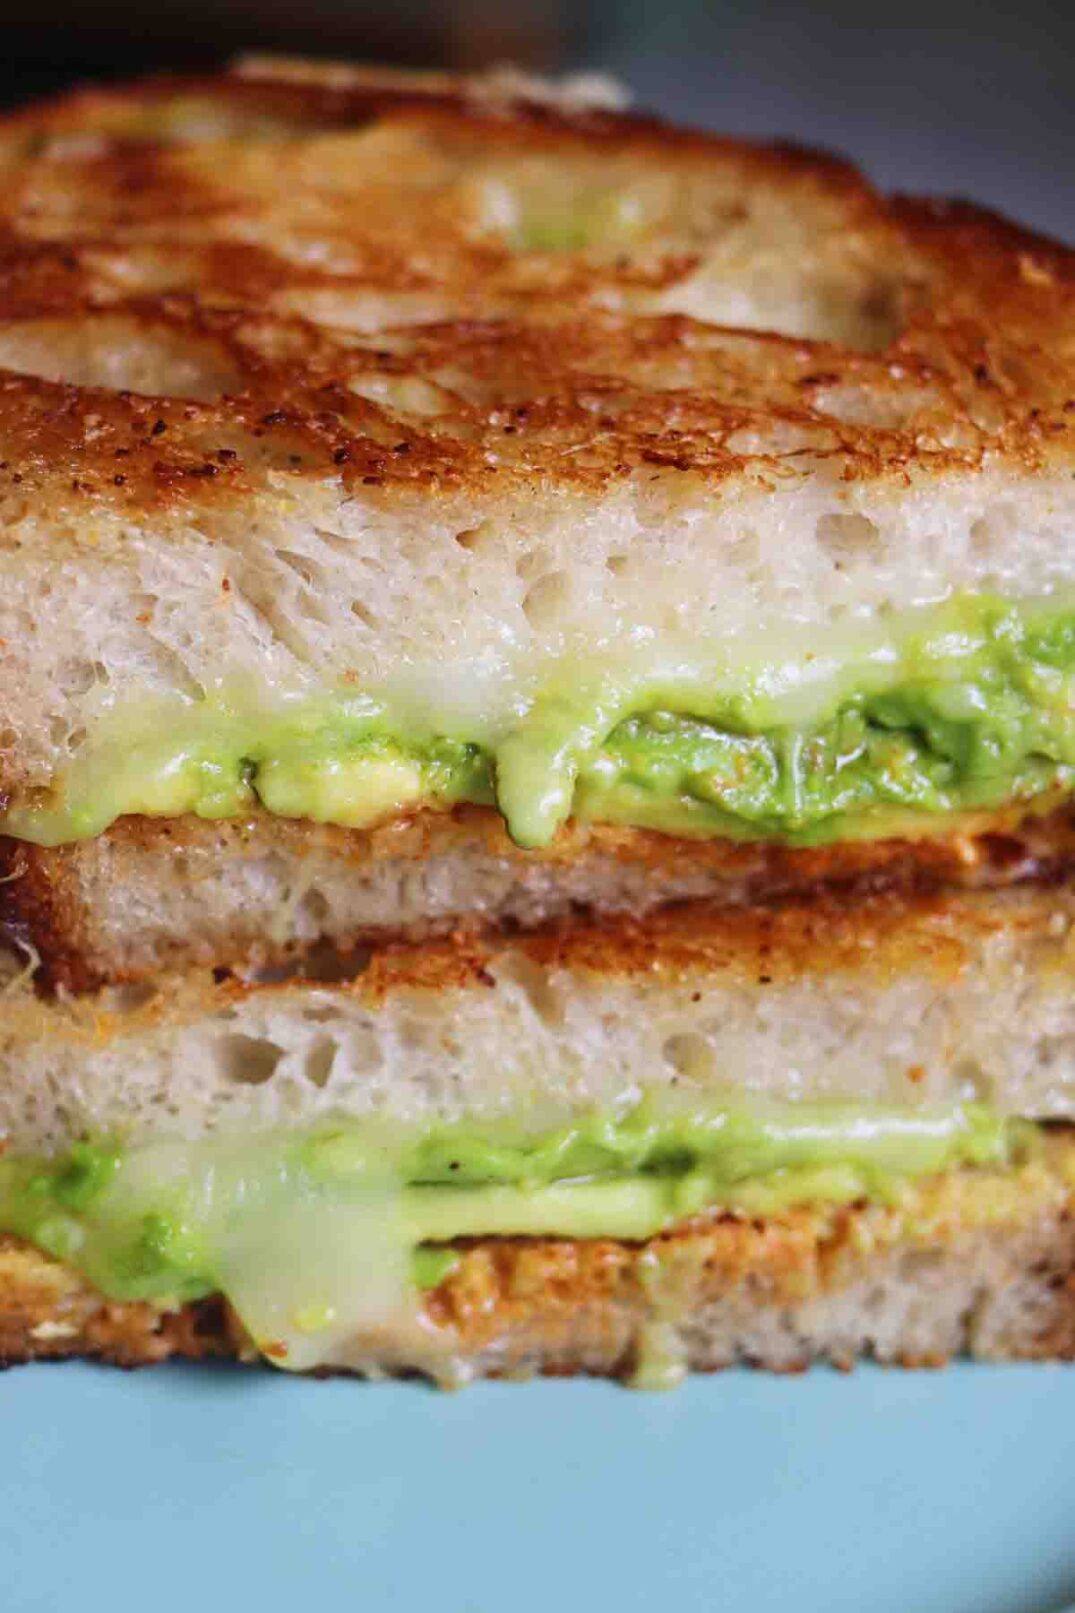 avocado and melted cheese on sourdough bread.